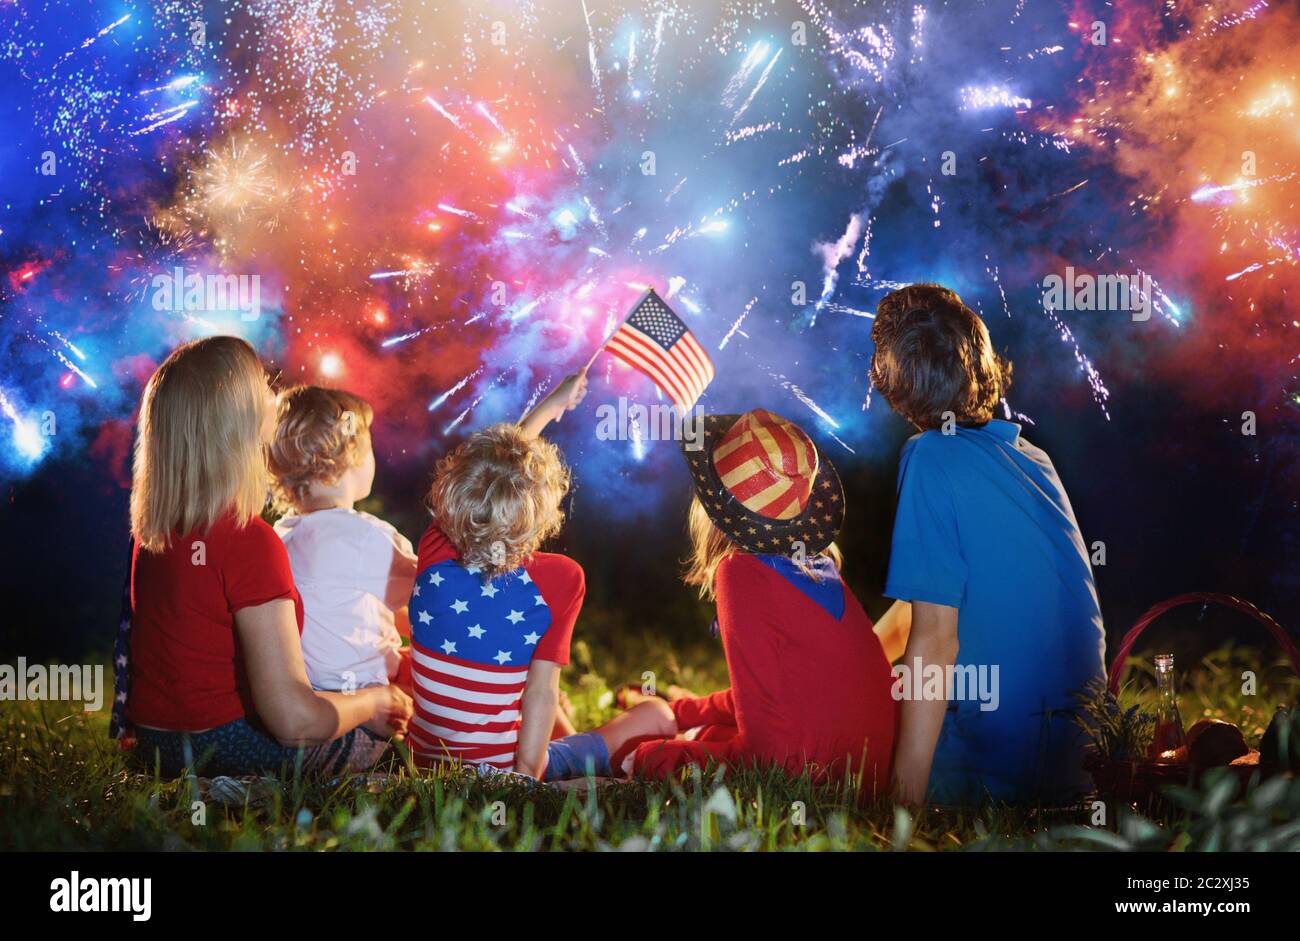 American family celebrating Independence Day. Picnic and fireworks on 4th of July in America 